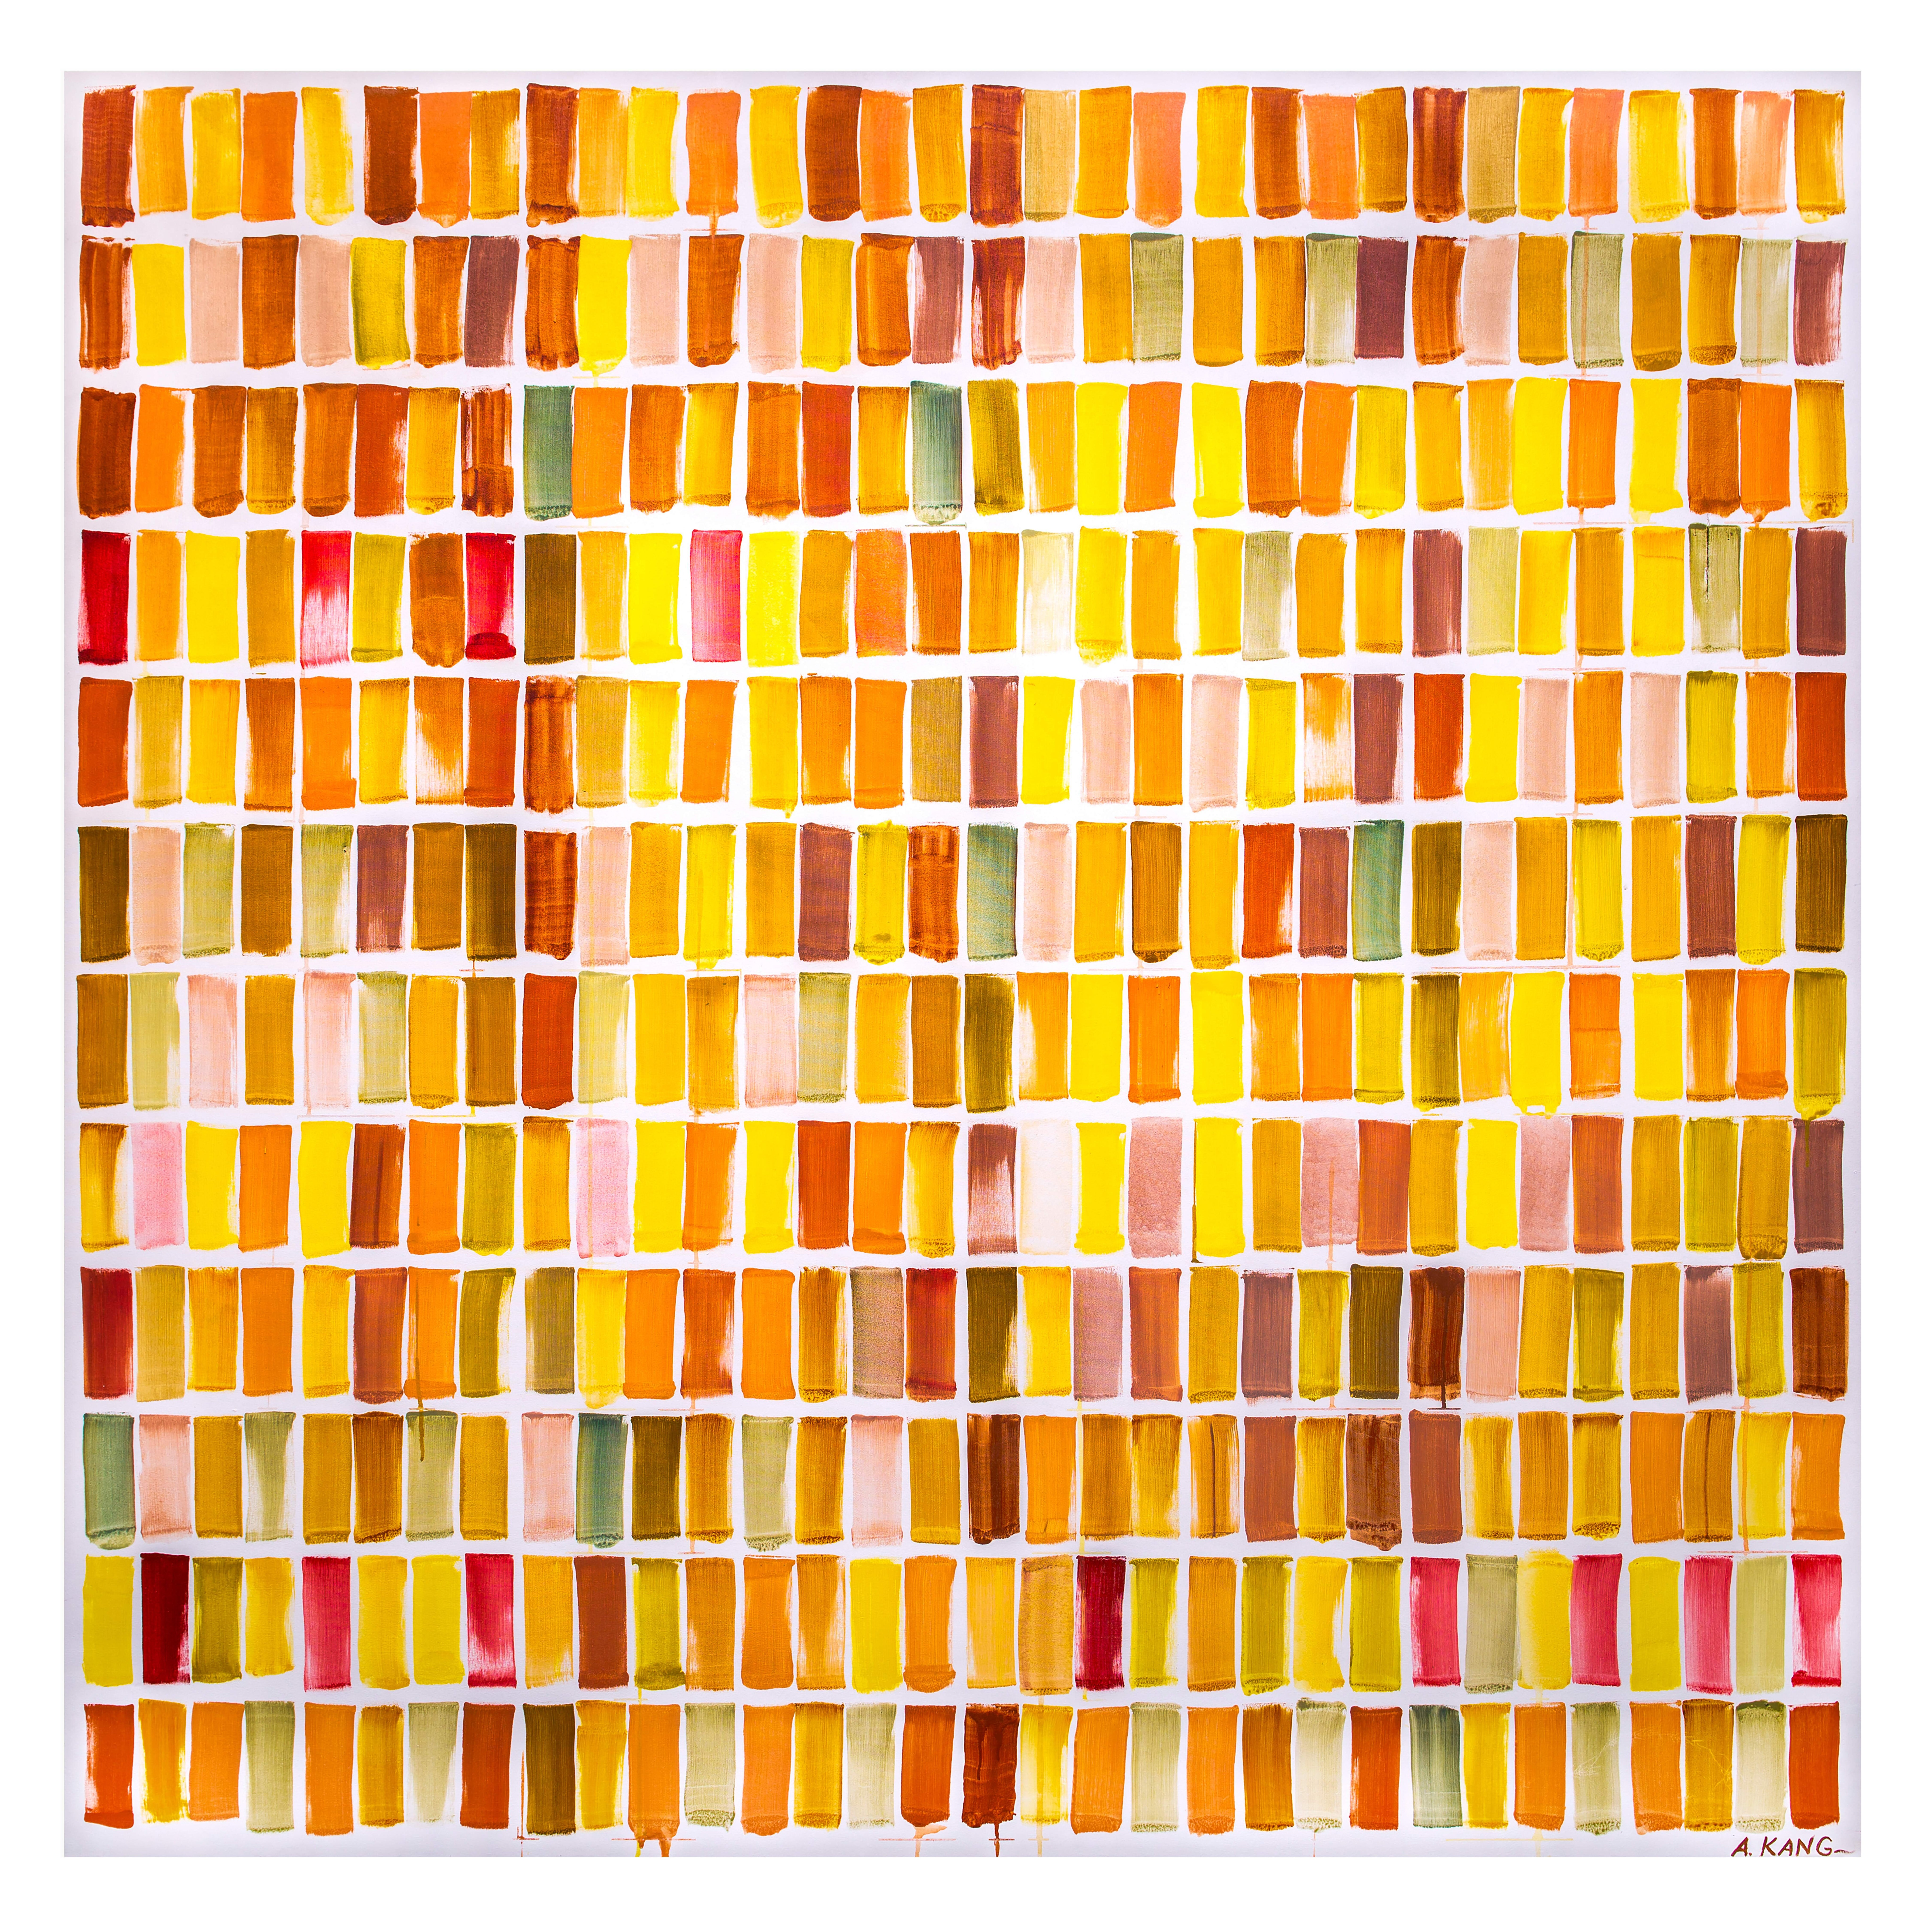 Bach 2-Warm tone pattern print edition on paper in square format